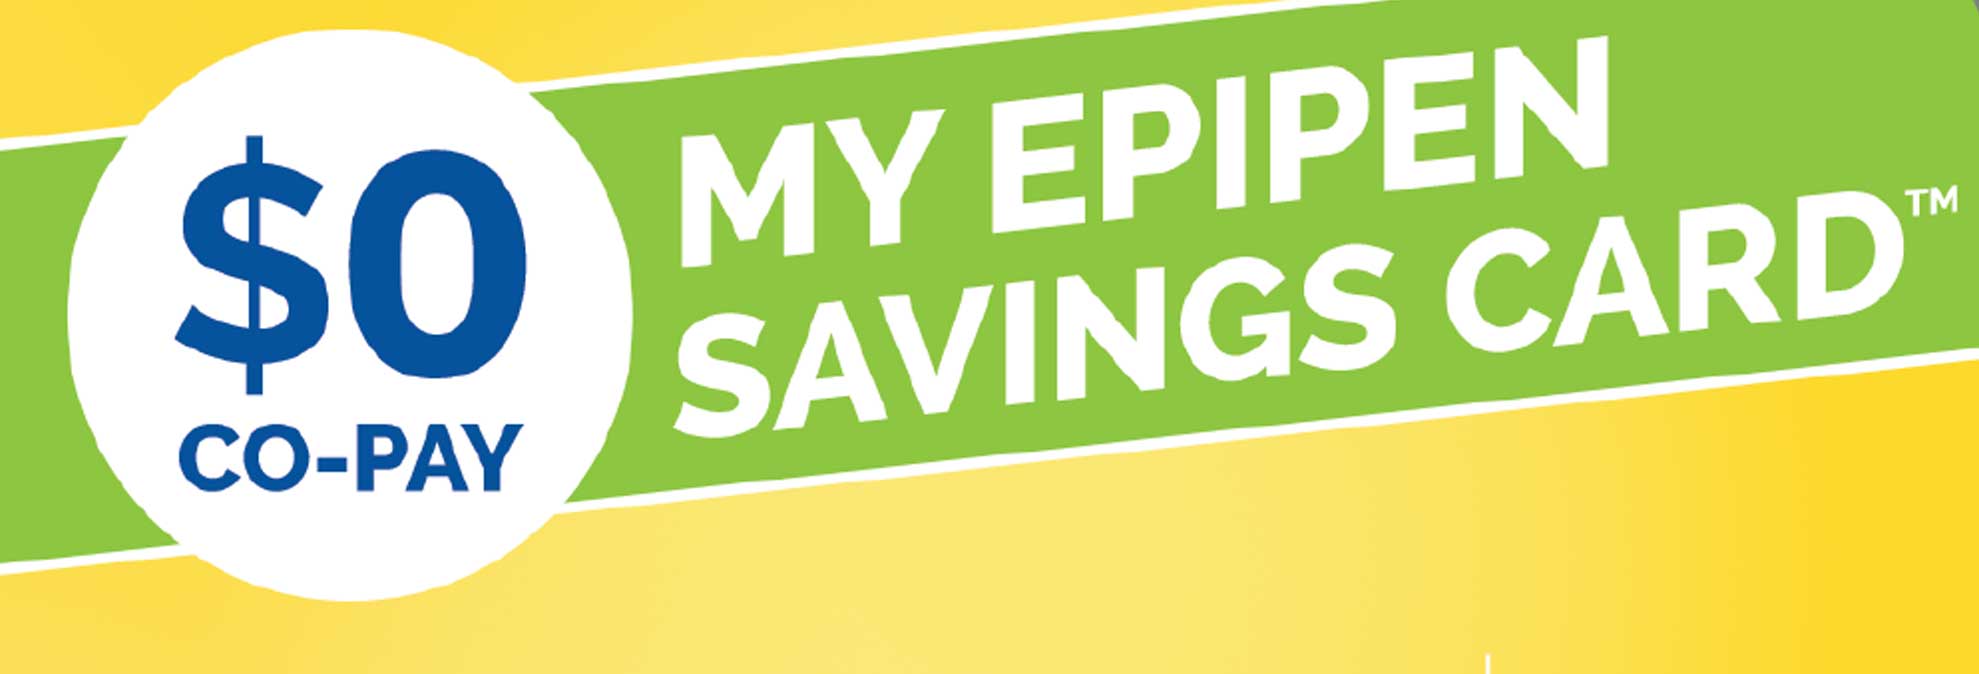 EpiPen Coupons Might Save You Money Consumer Reports